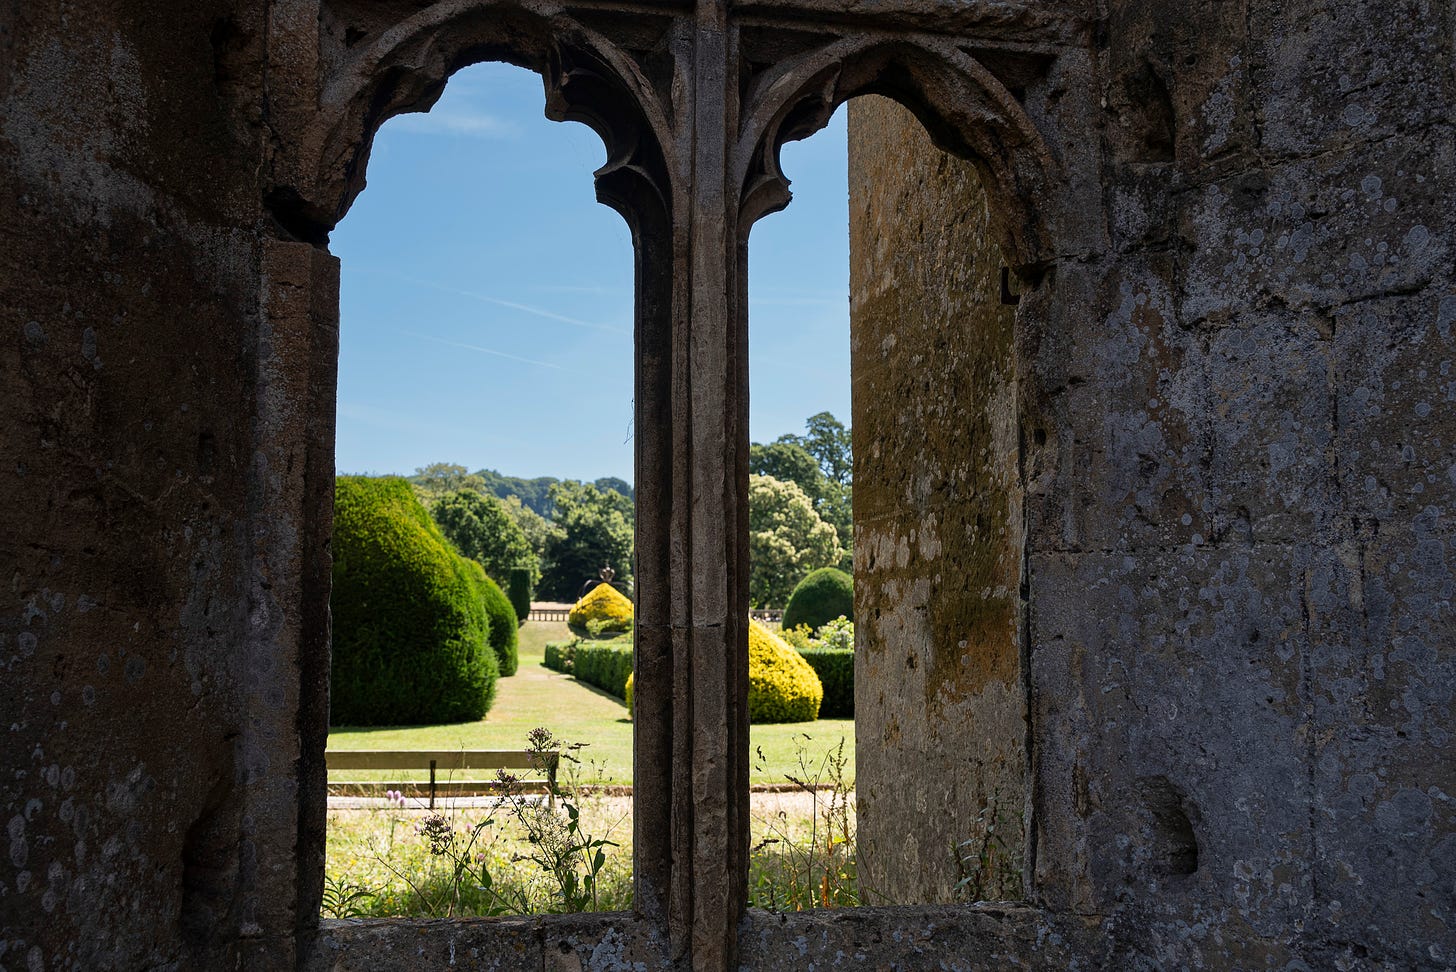 A view through the window of a castle ruin looking out at the lush landscaped garden and a wooden bench